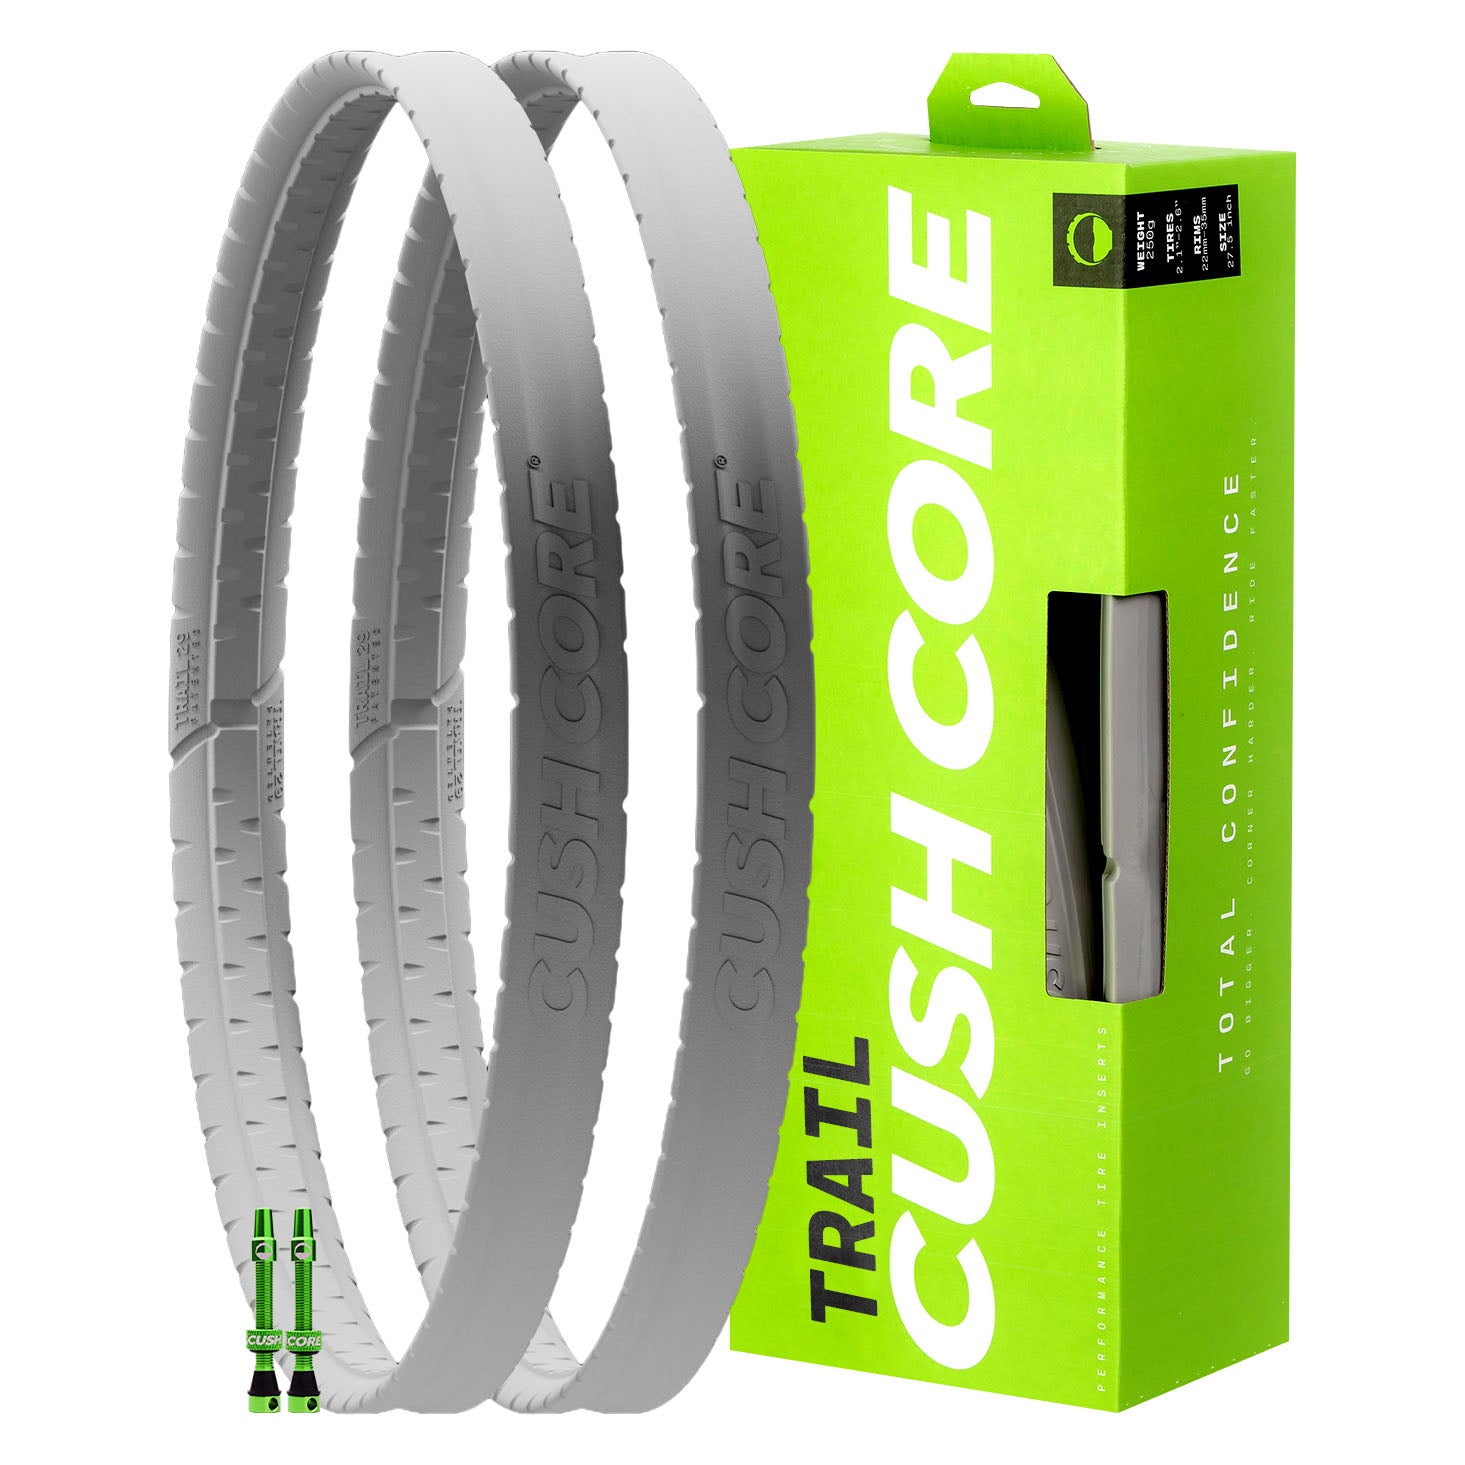 Cush Core Trail Tire Insert Mixed 27.5"/29" Set with Valves